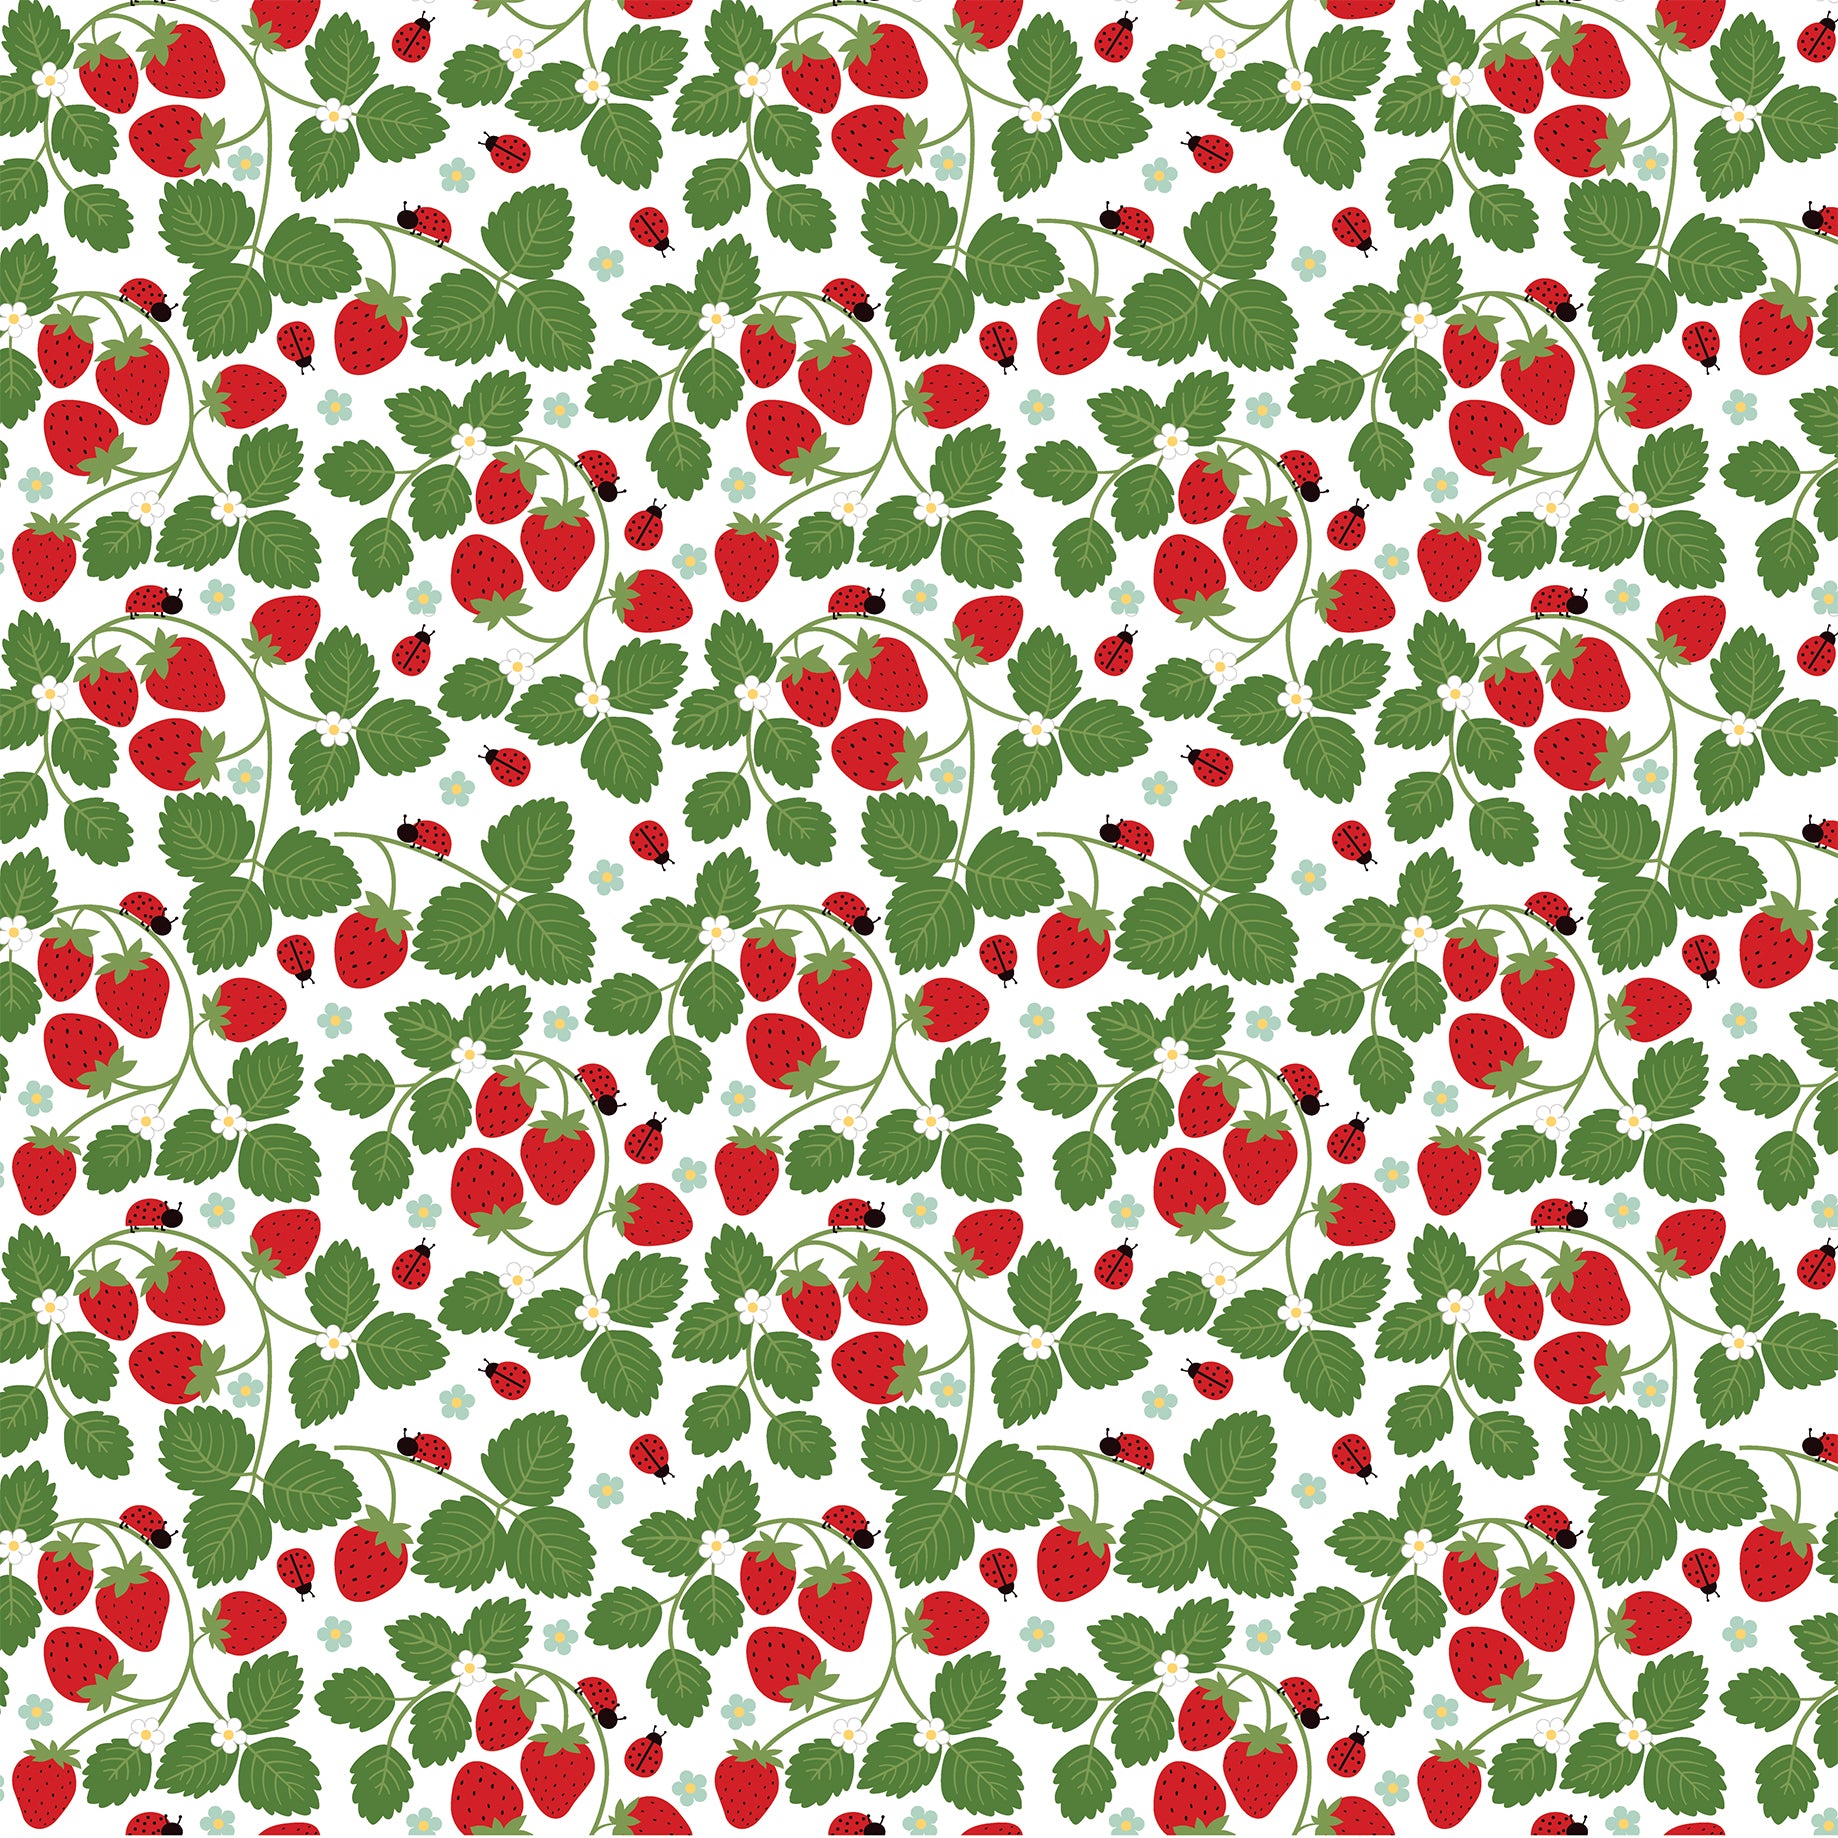 Little Ladybug Collection Sweet Strawberries 12 x 12 Double-Sided Scrapbook Paper by Echo Park Paper